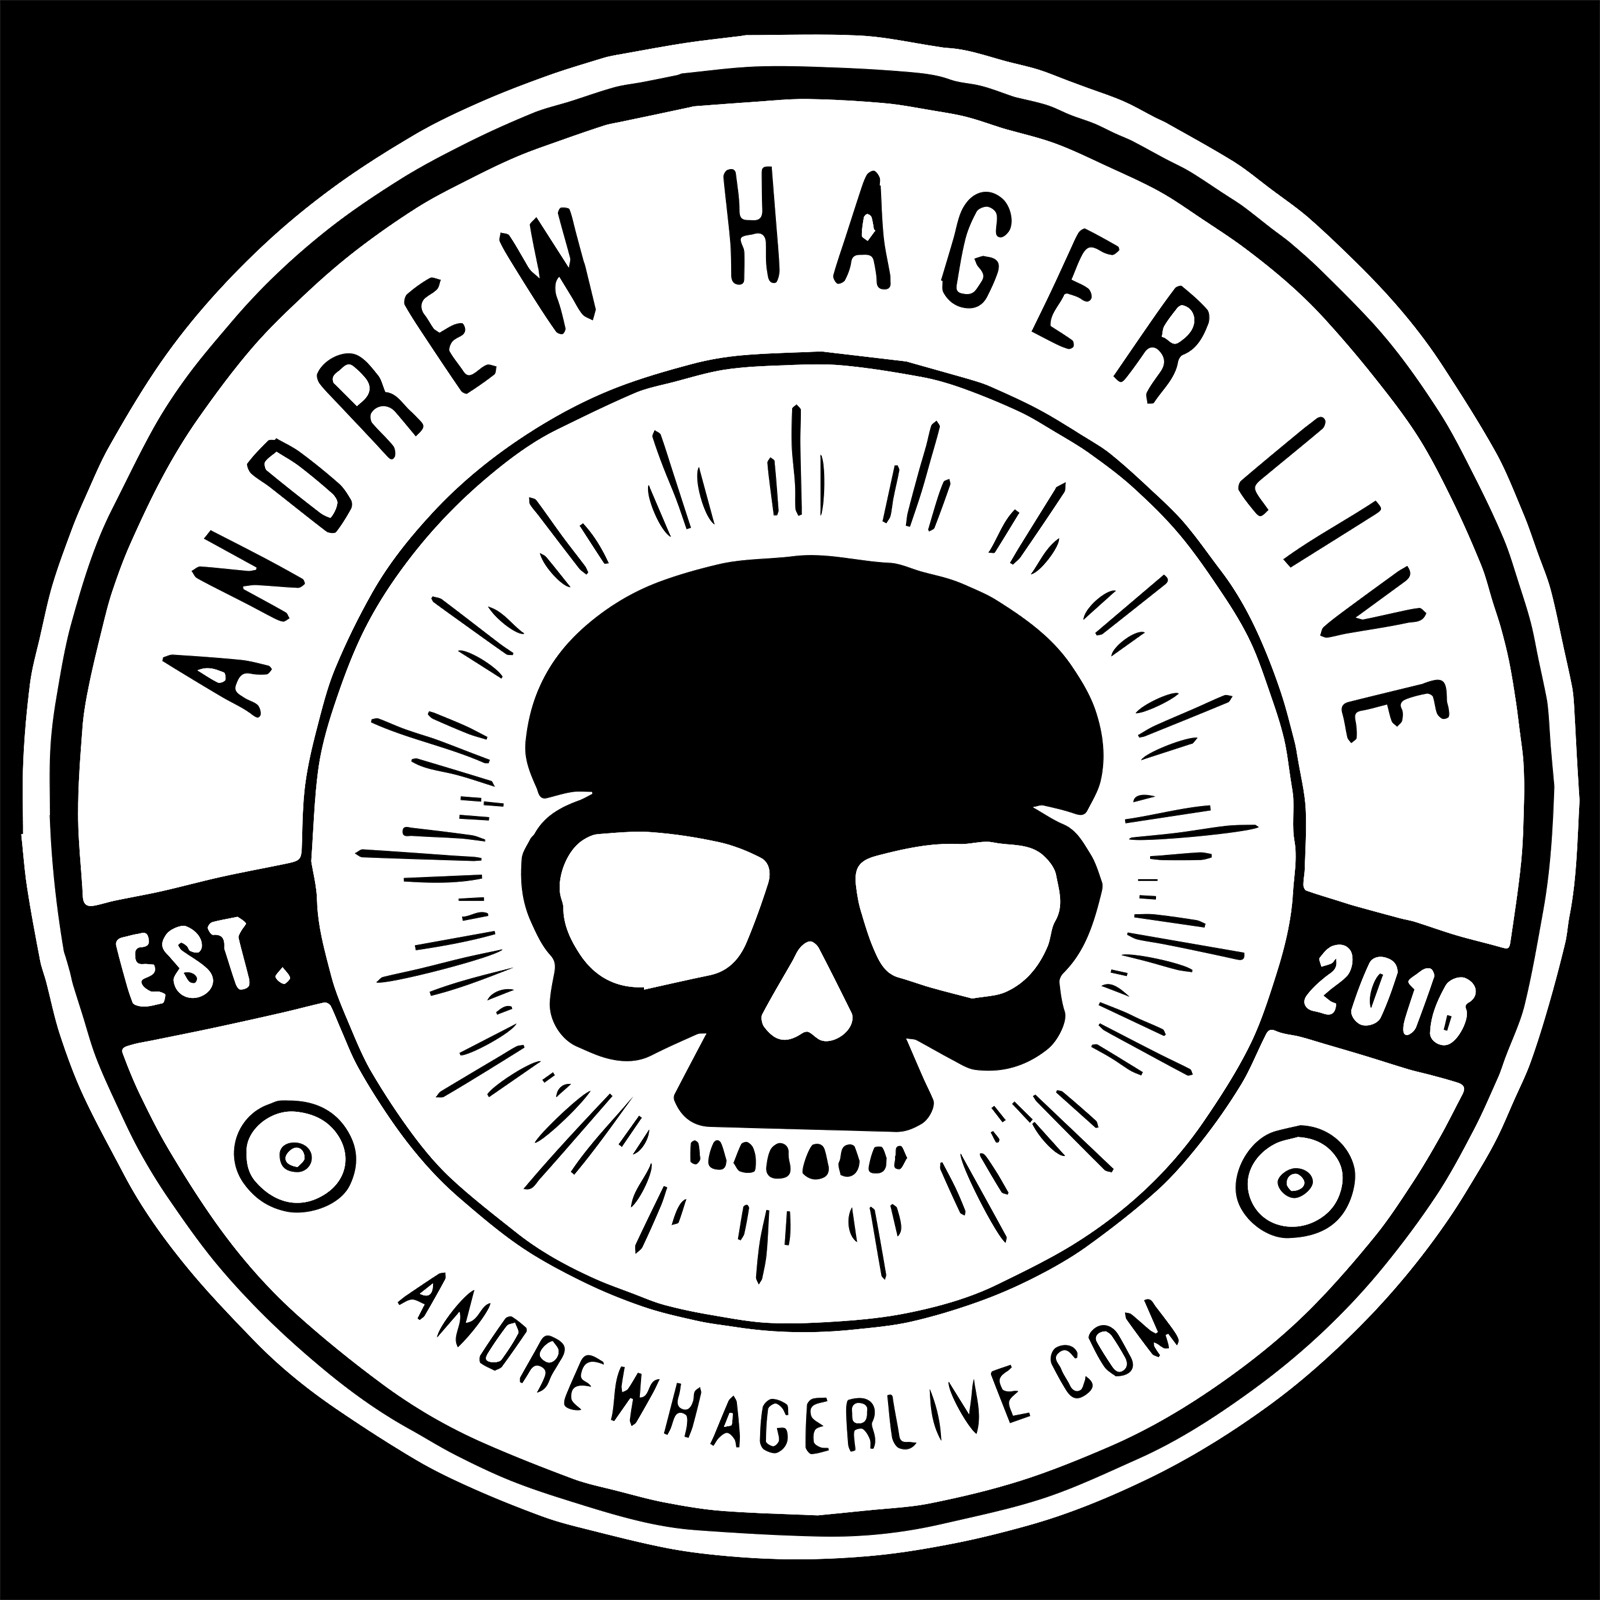 ANDREW HAGER LIVE